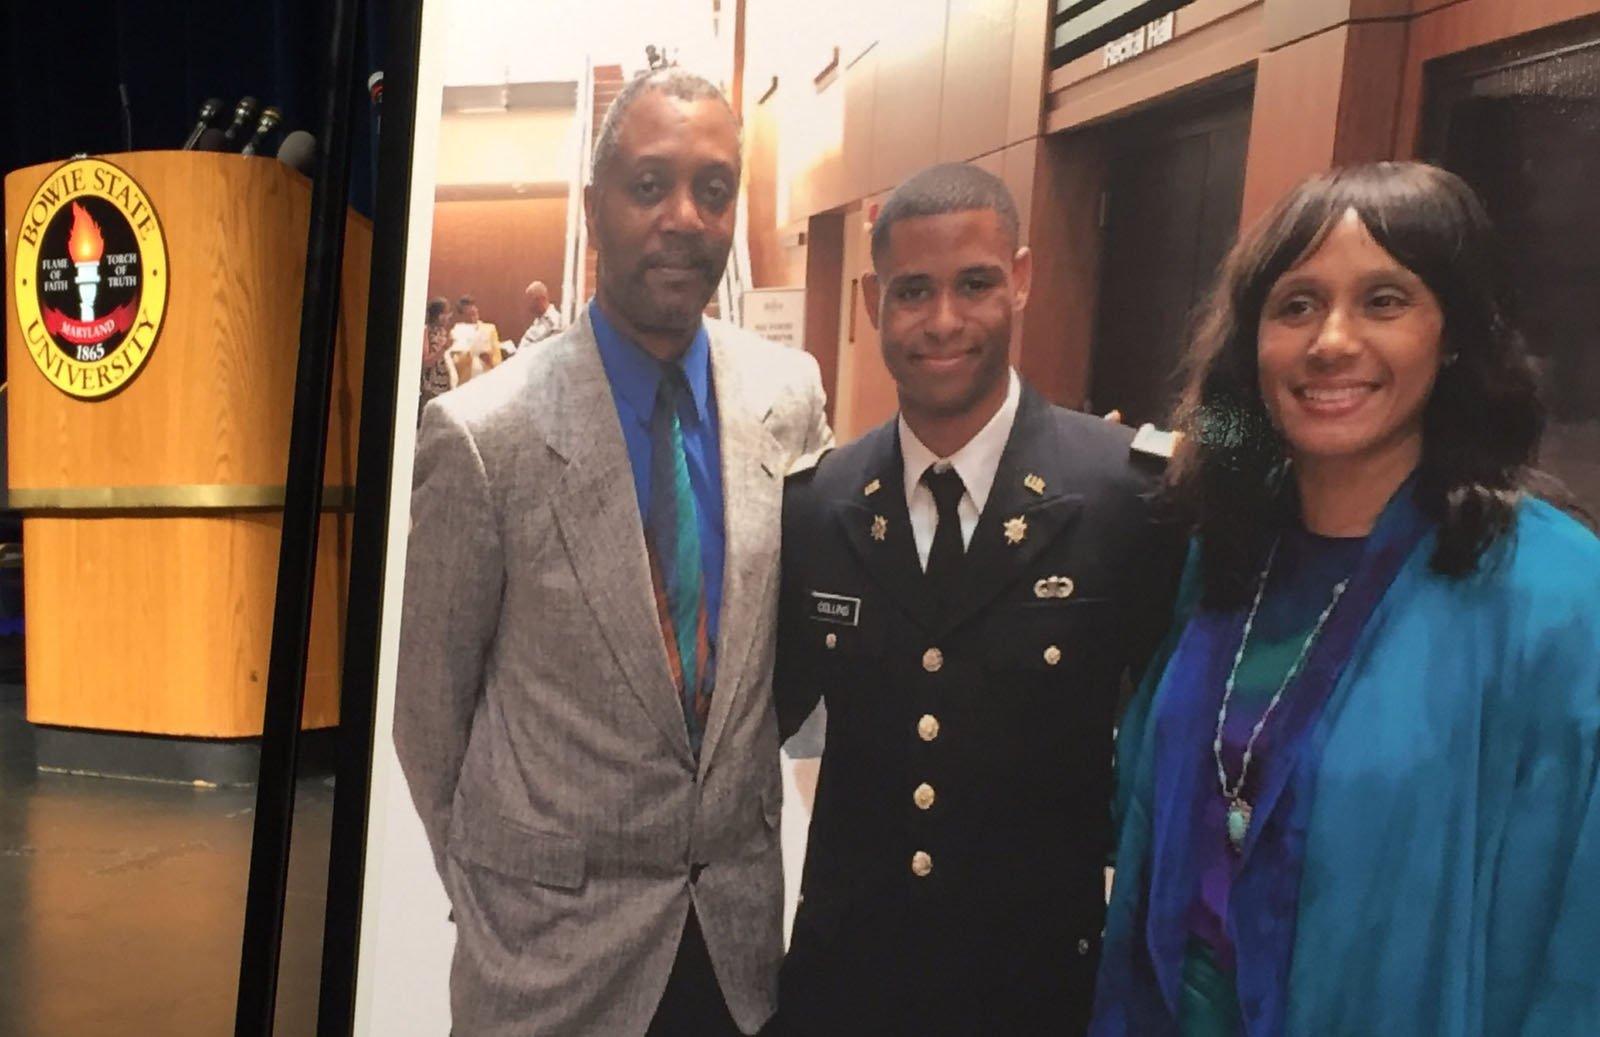 Richard Collins III, 23, was a Bowie State University student who was about to graduate and was just commissioned last week to join the Army as second lieutenant. In the early hours of Saturday, he was stabbed to death on the University of Maryland's College Park campus. (WTOP/Michelle Basch)